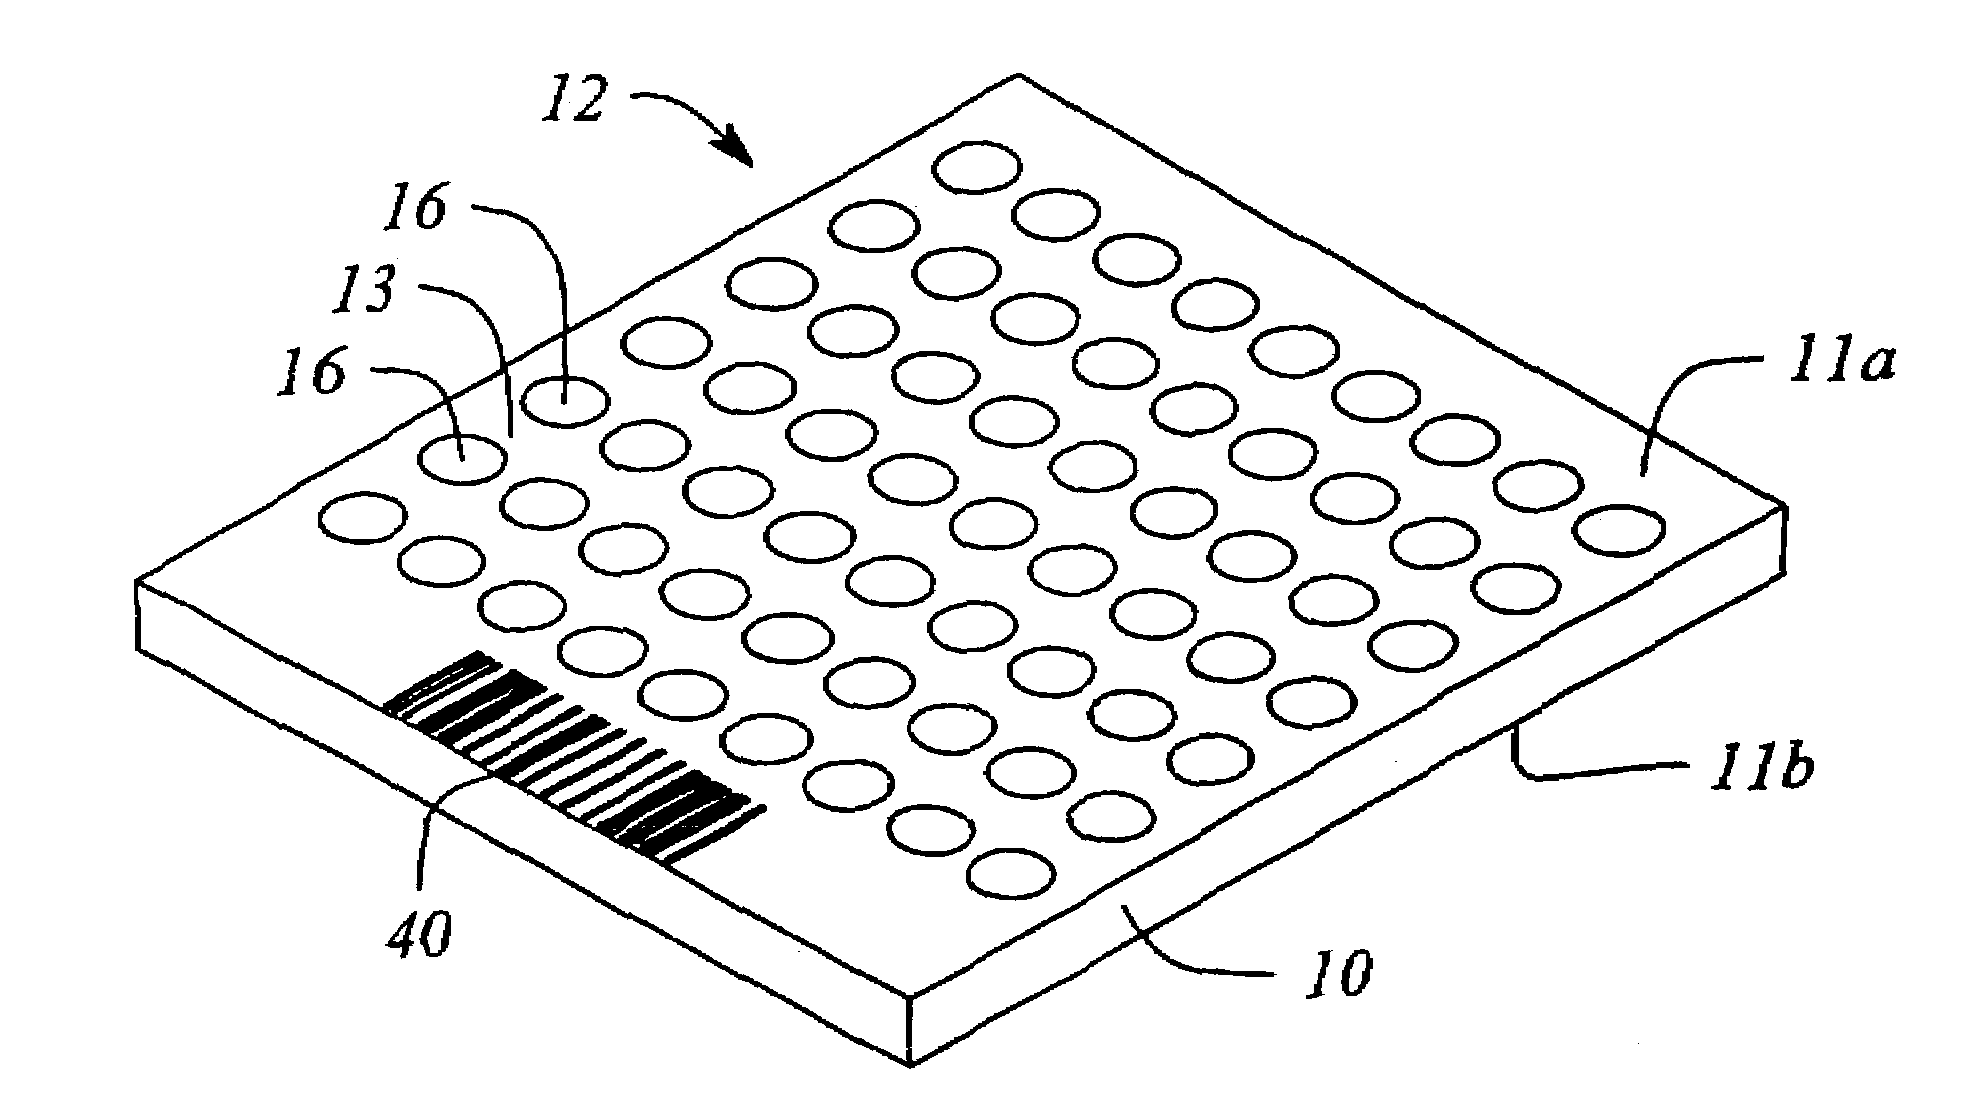 Method and apparatus for microarray fabrication